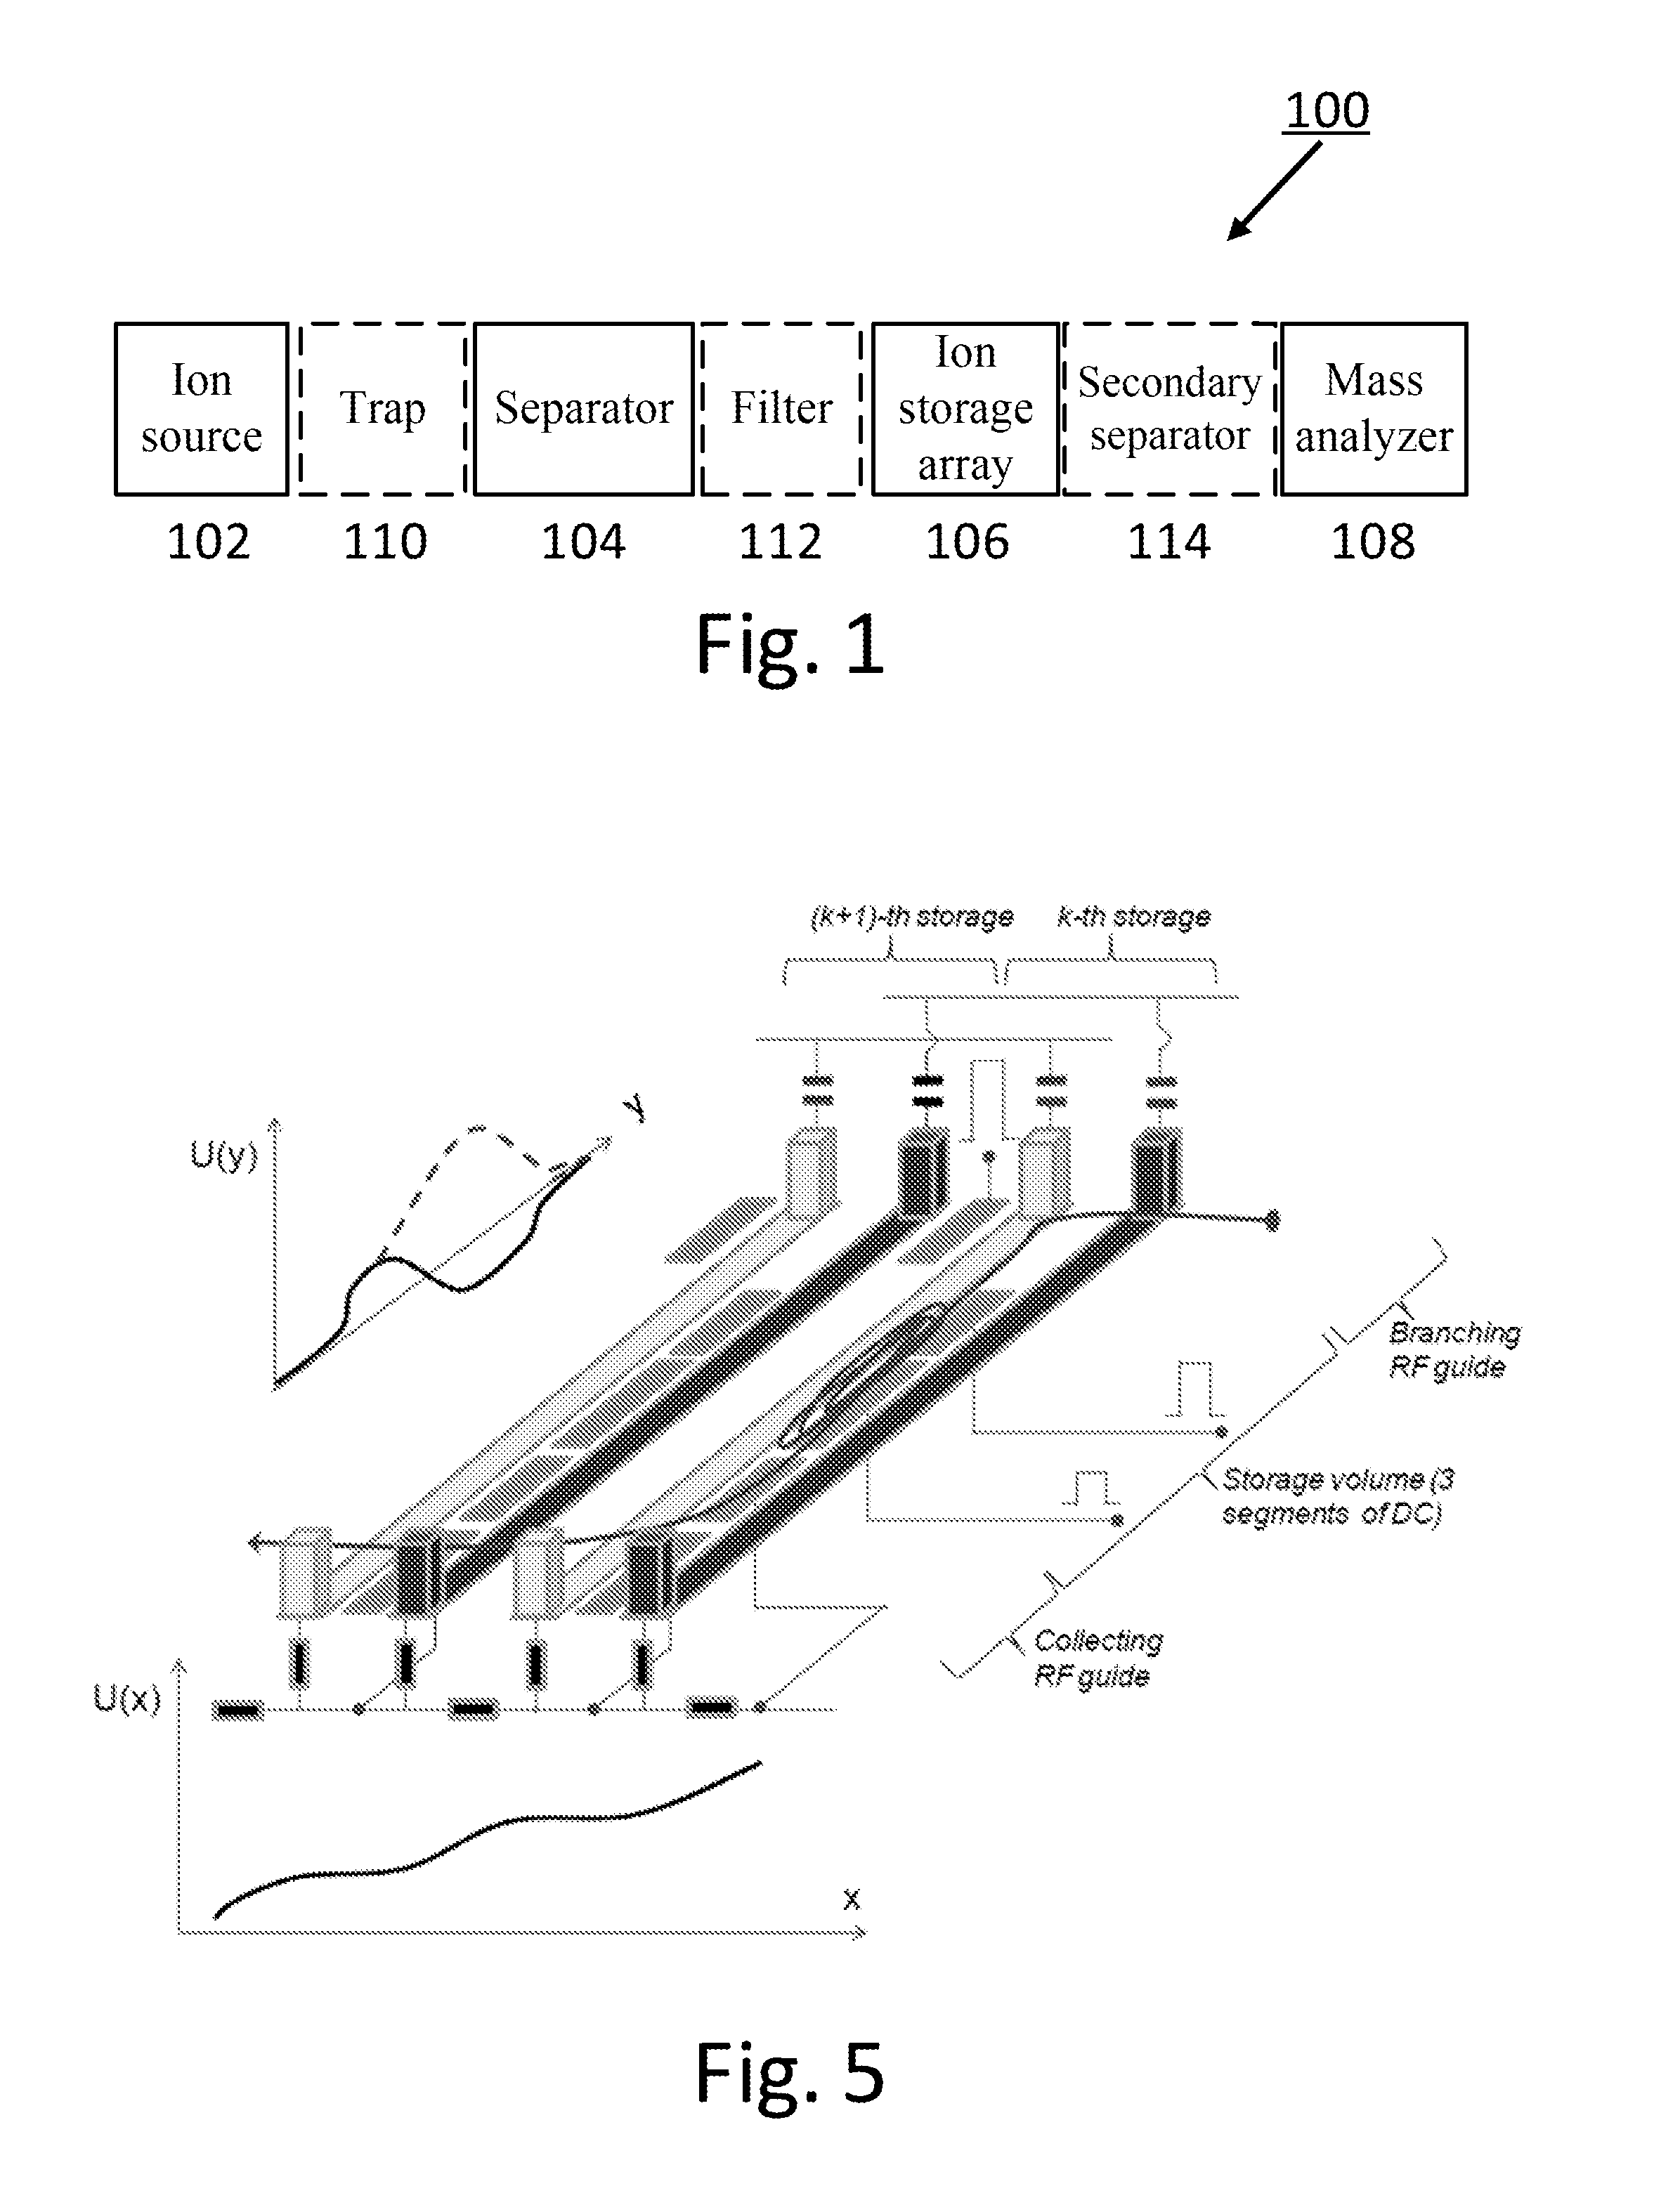 Ion Separation and Storage System